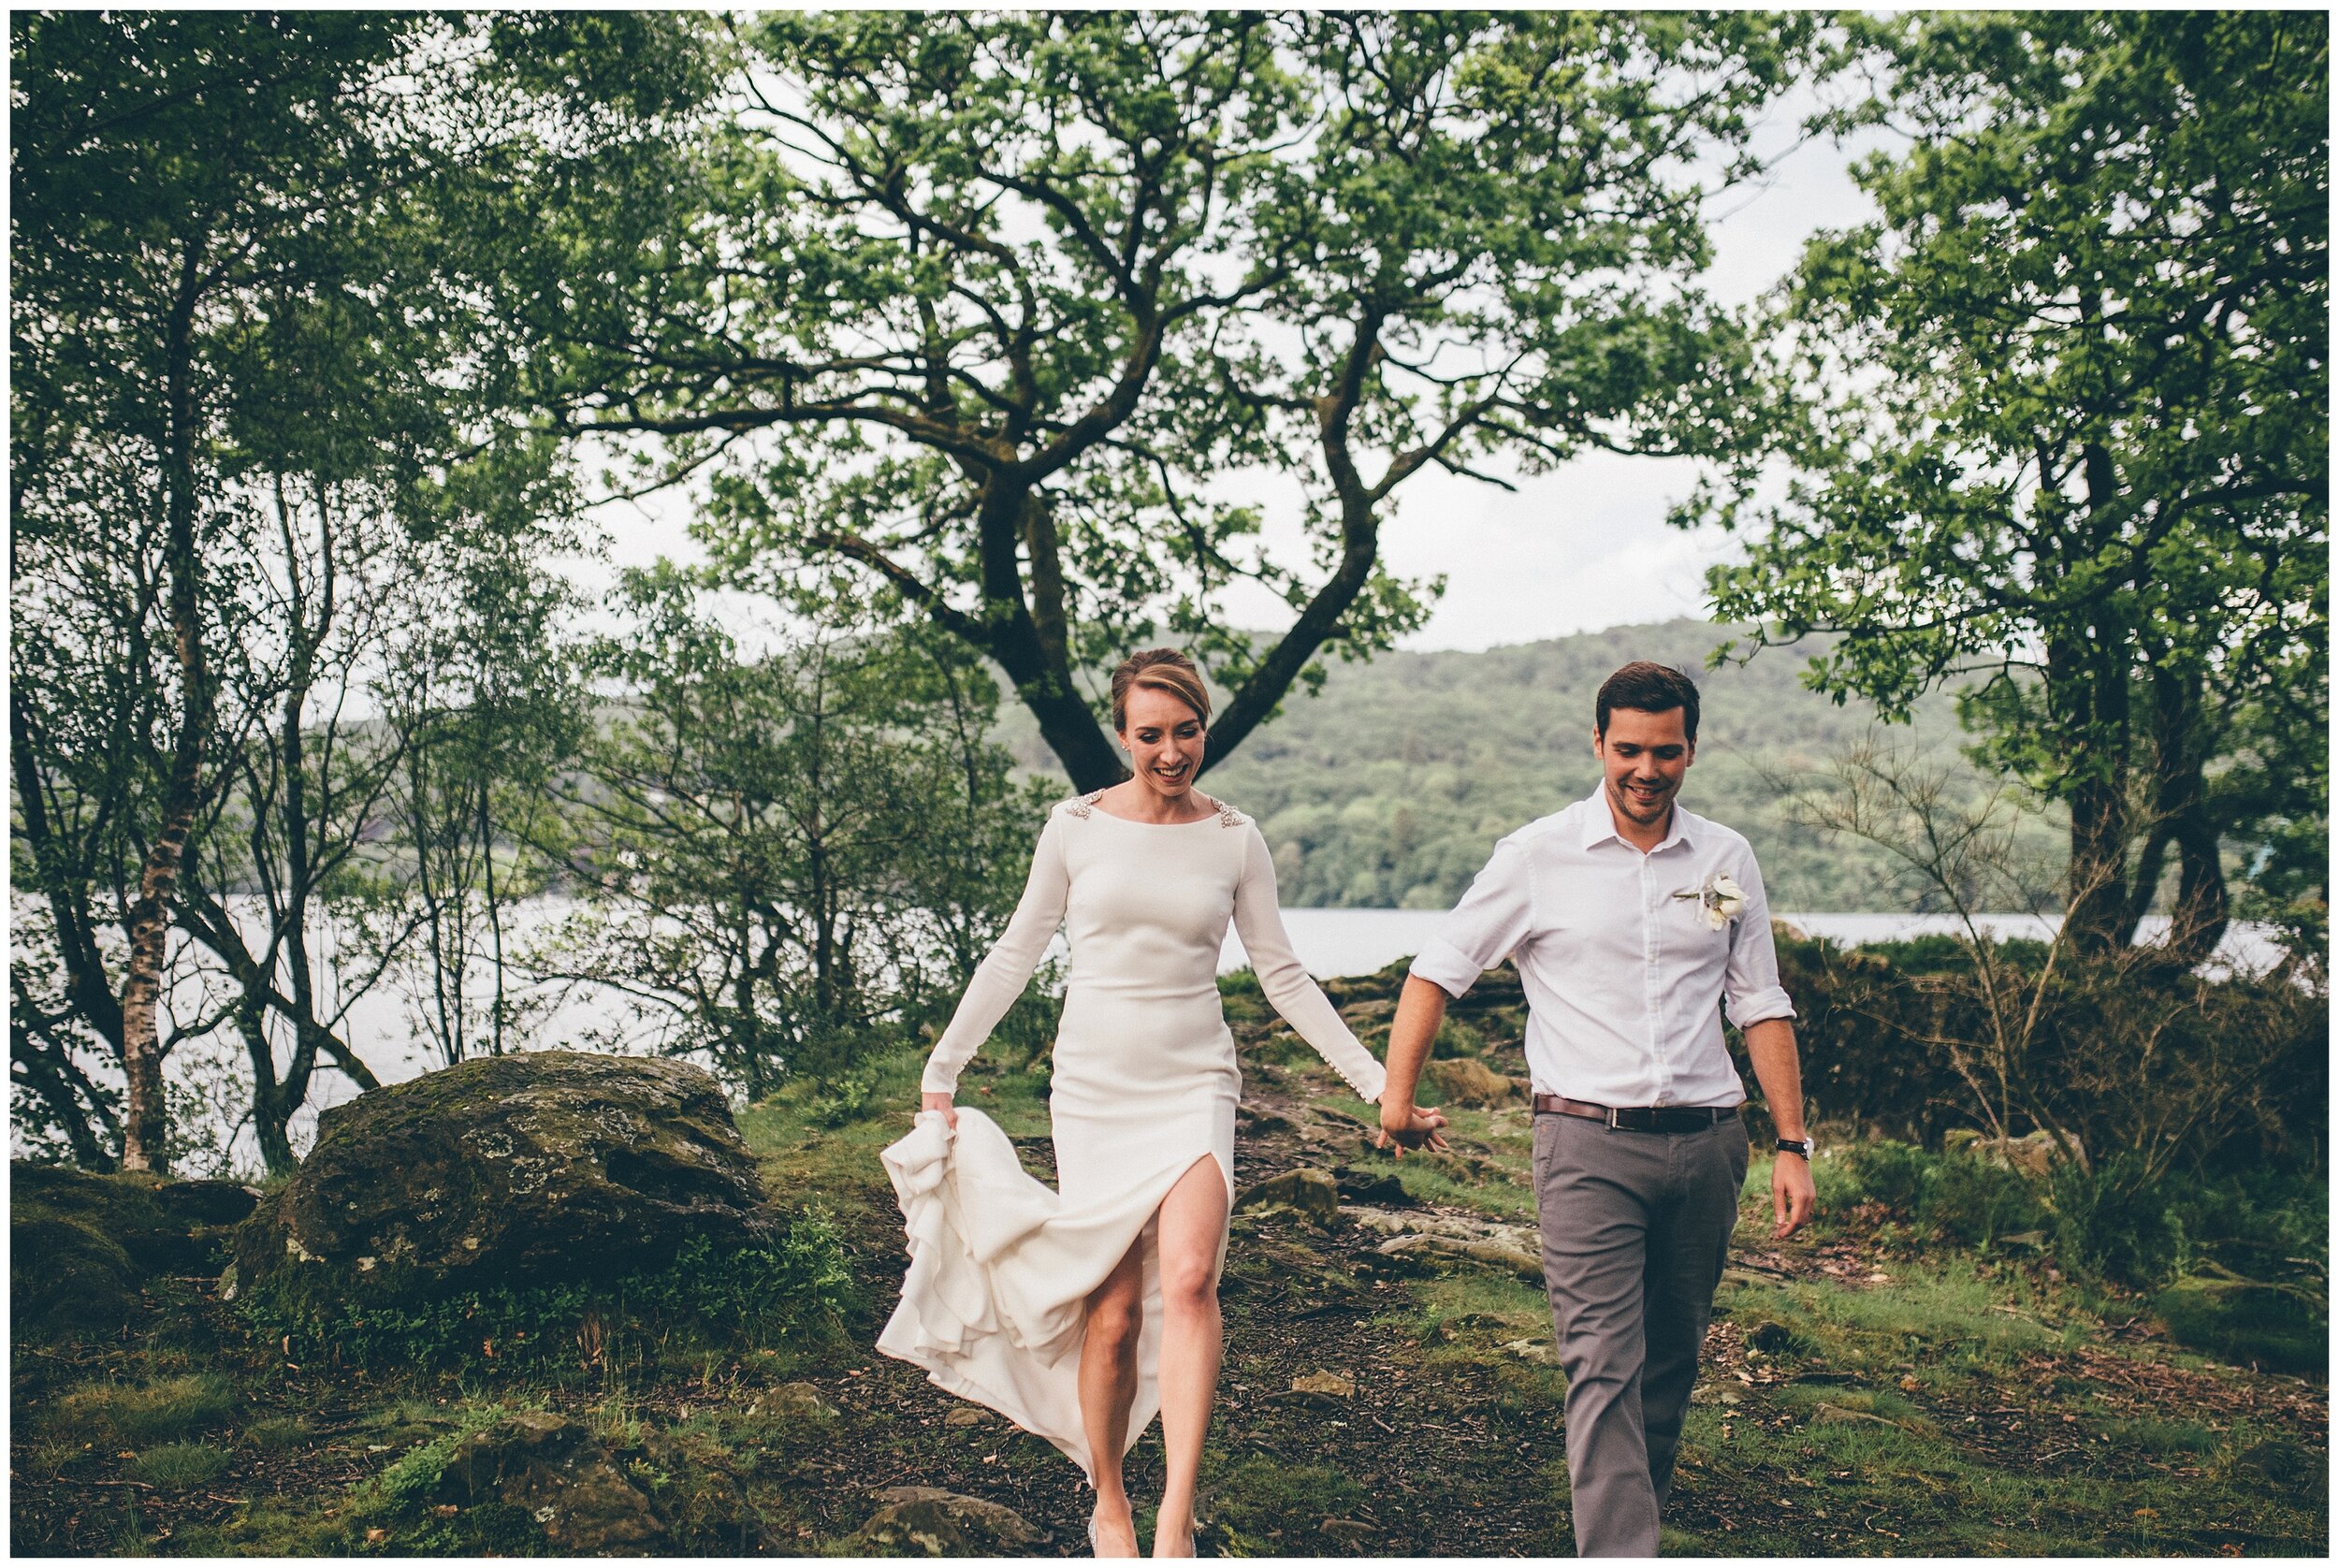 Wedding photography at Grubbins Point in the Lake District.